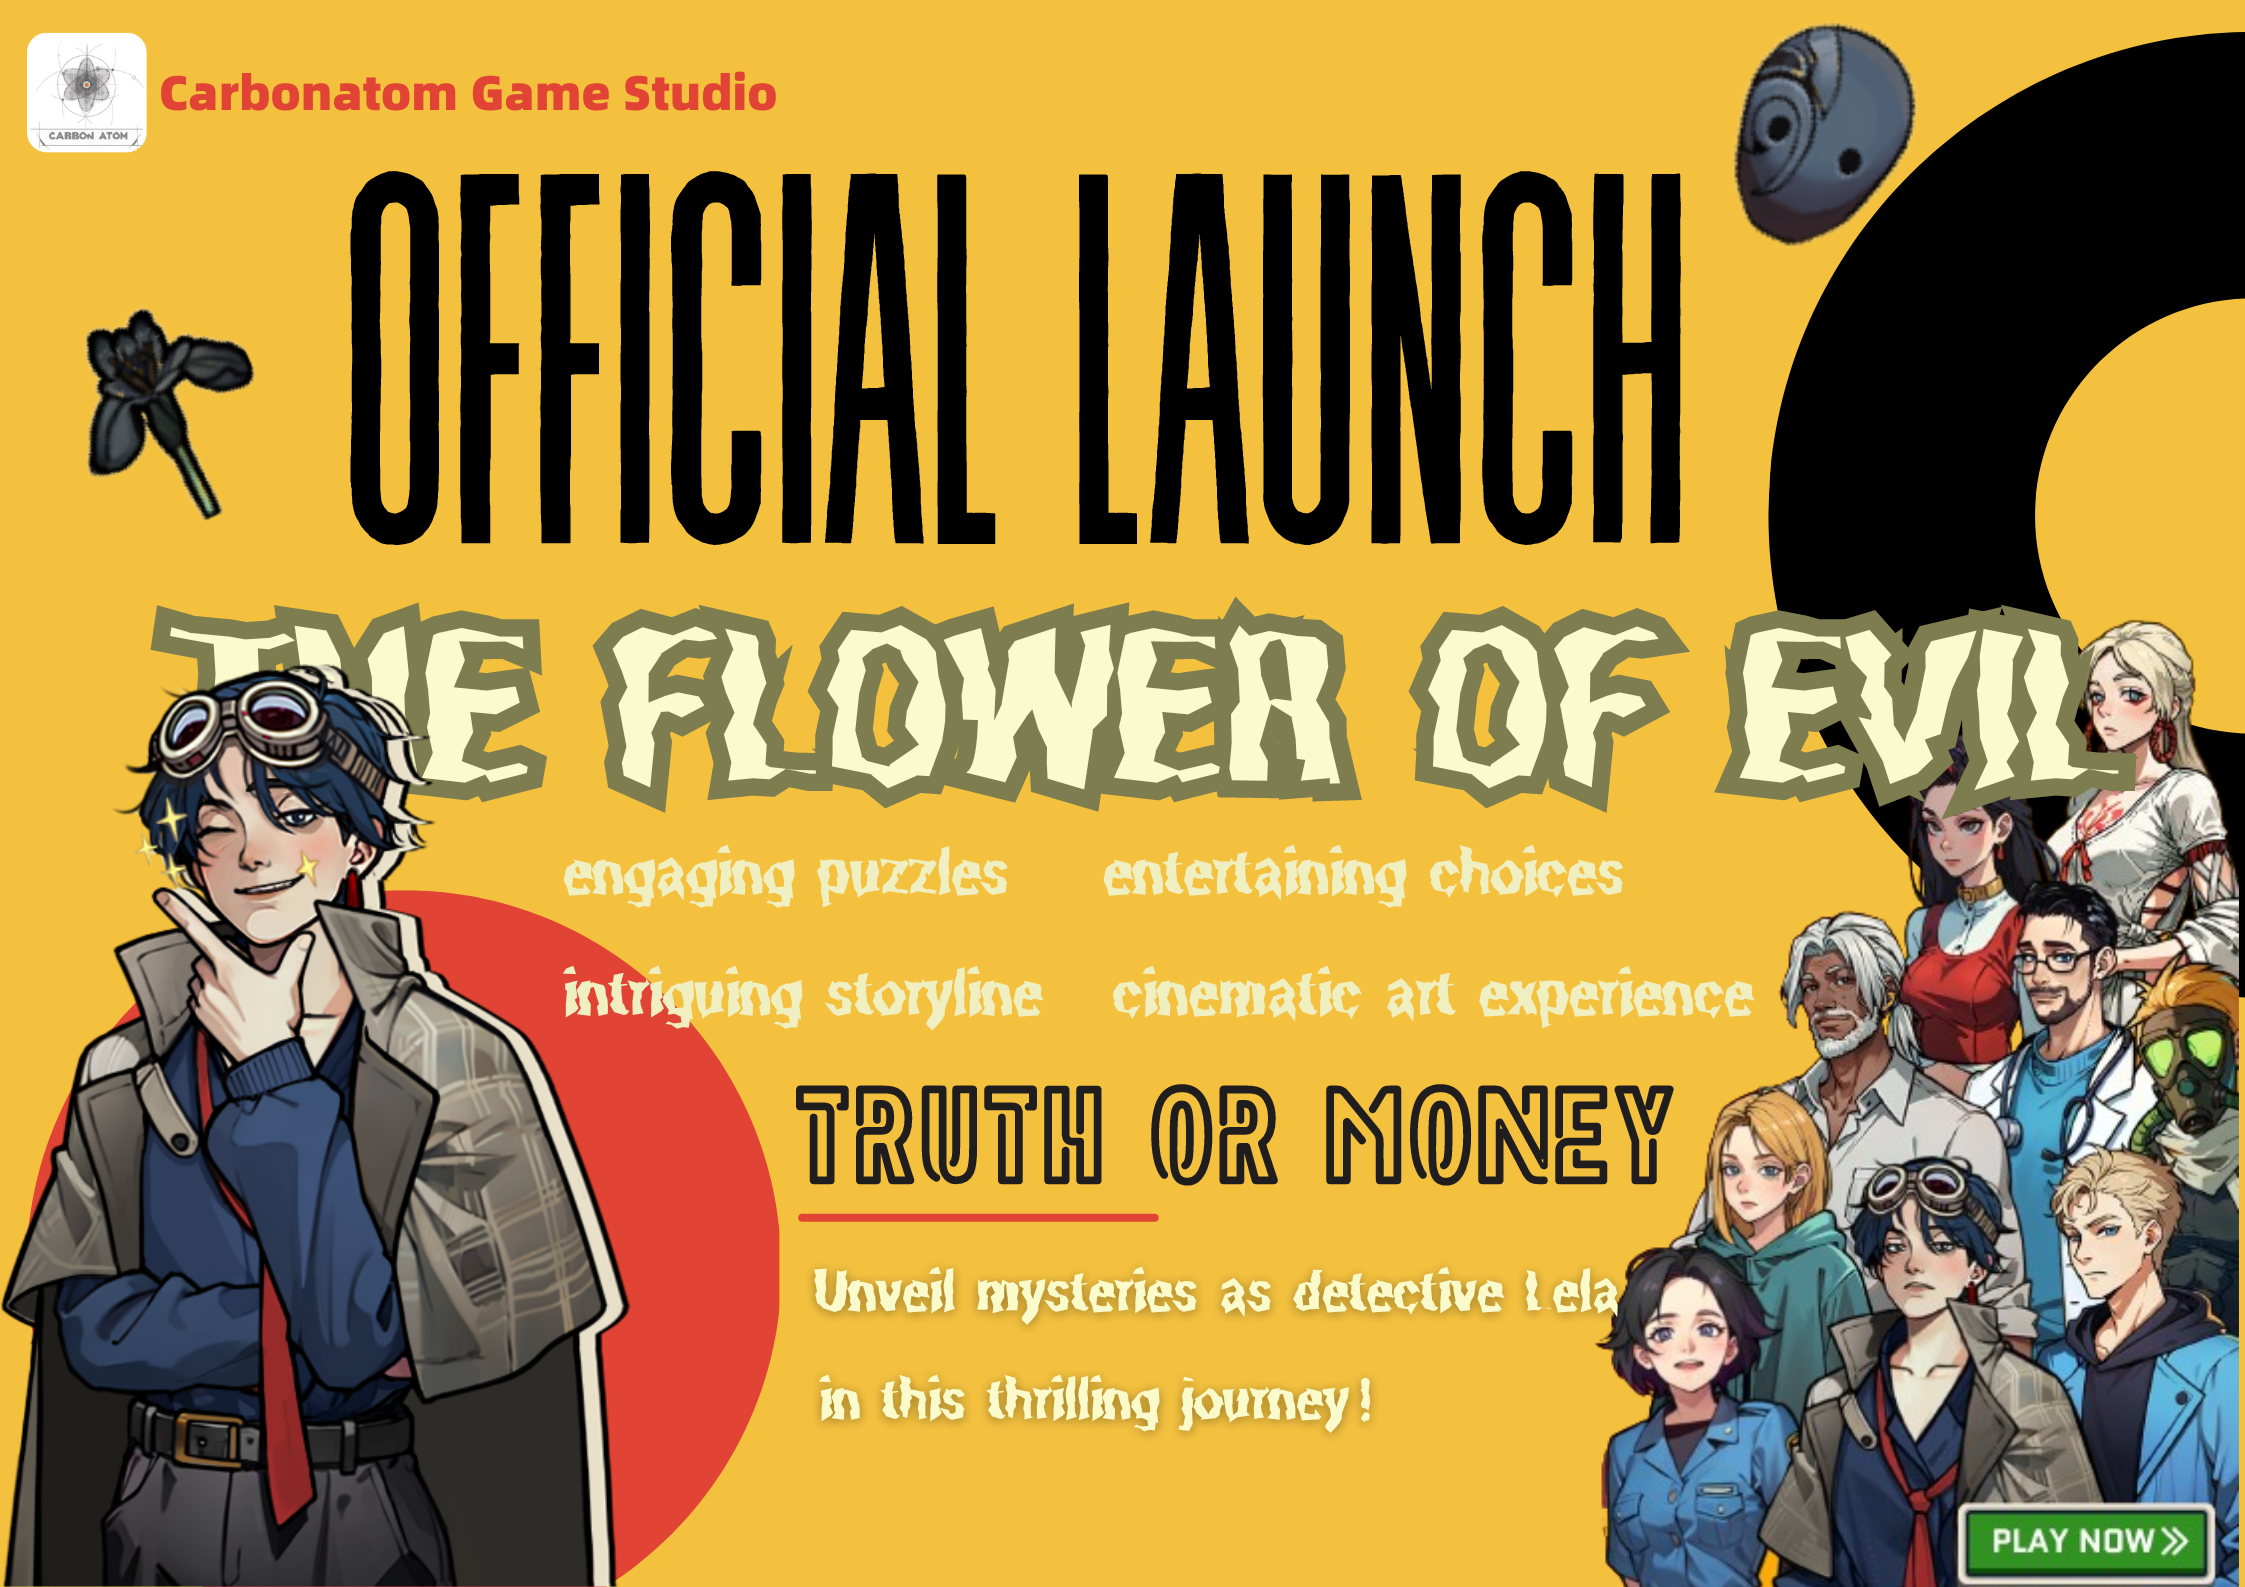 Official Launch: The Flower of Evil Now Available!